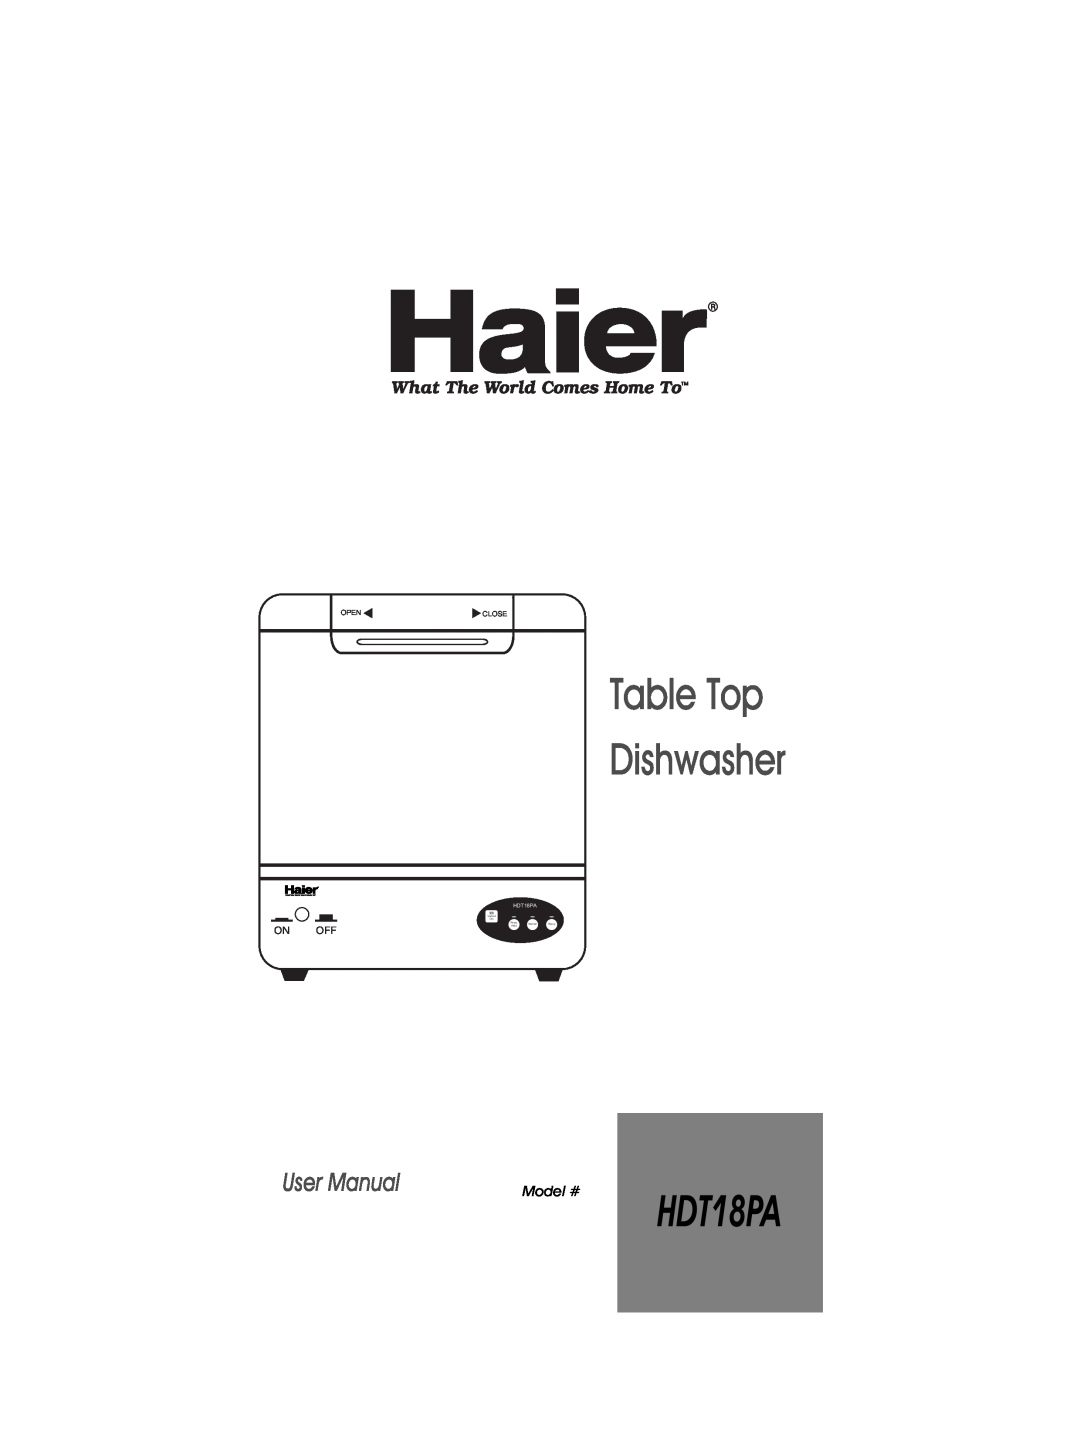 Haier HDT18PA user manual Table Top Dishwasher, Model #, On Off, Openclose, Vented Dry, Rinse, Normal, Heavy, Hold 